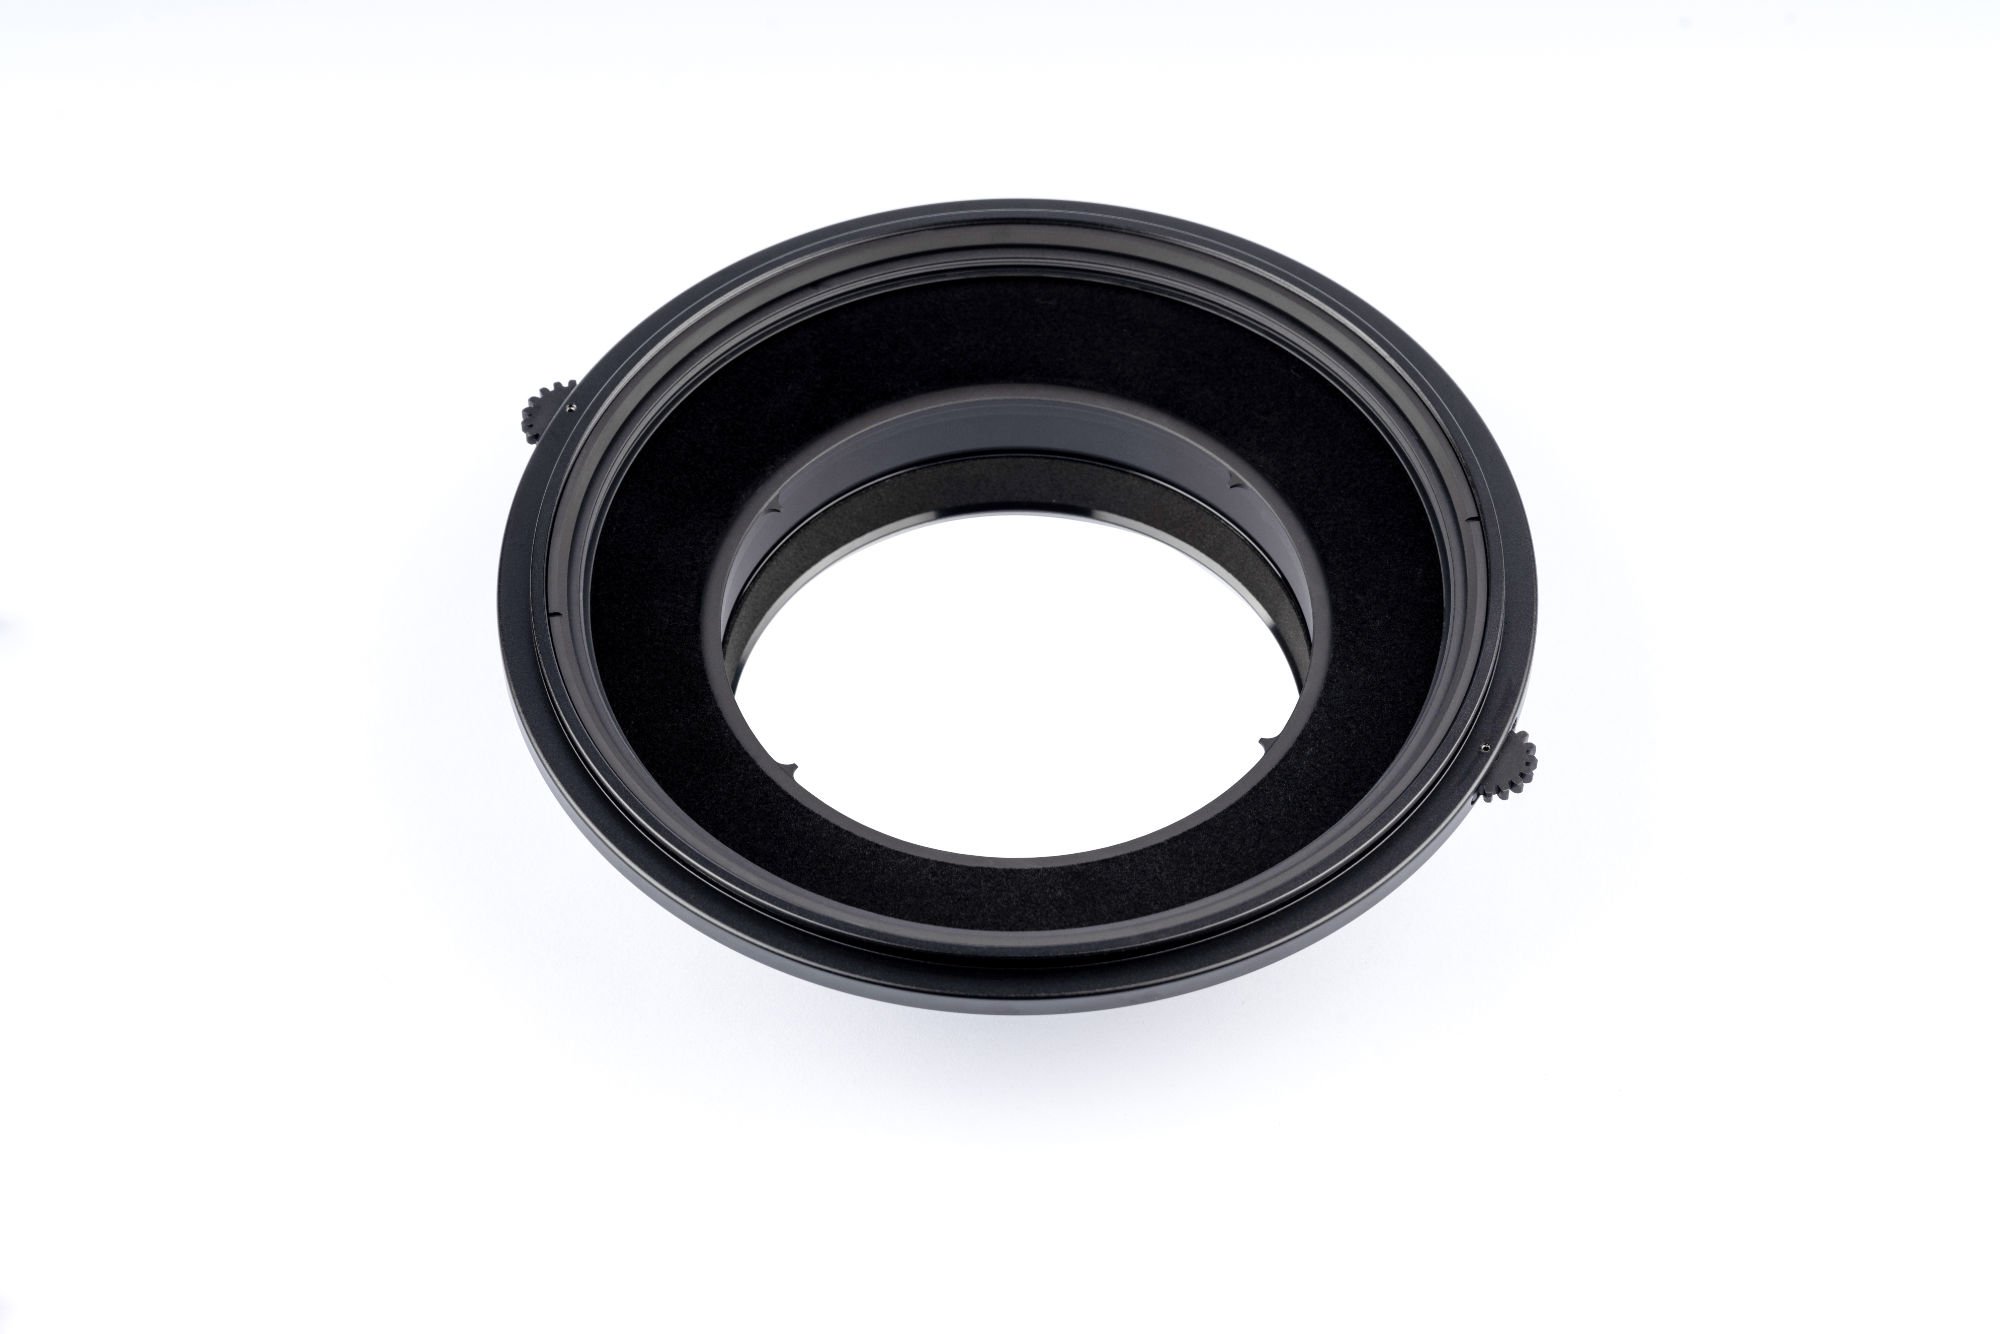 NiSi S6 150mm Filter Holder Kit with True Color NC CPL for Sigma